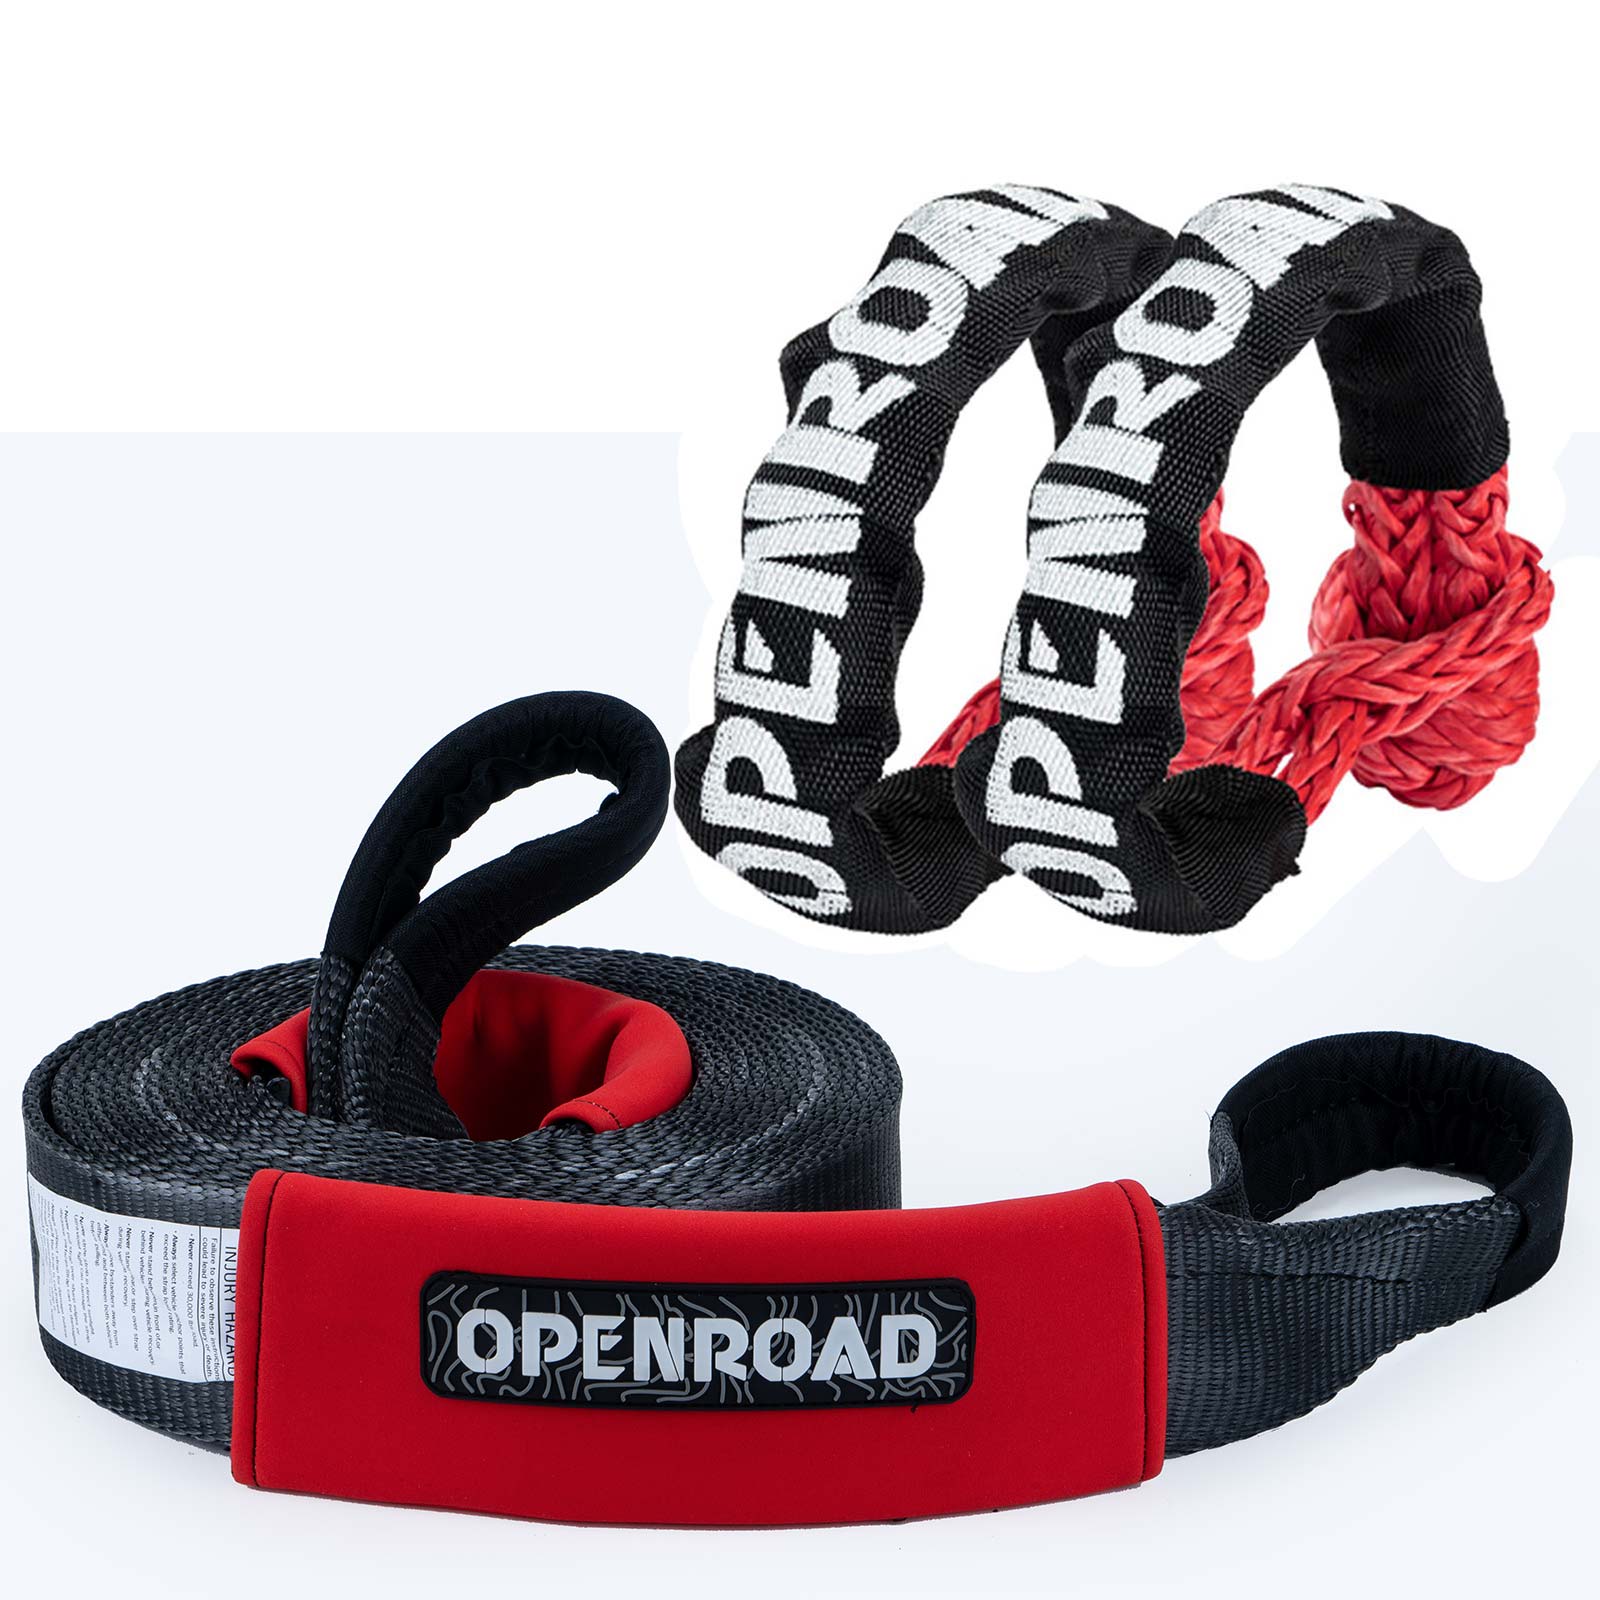 OPENROAD Nylon Heavy Duty Tow Strap Recovery Strap 3" x 30 ft (30,000 lbs) Snatch Strap,  Storage Bag  openroad4wd.com 3" x 30' Tow Strap+Soft Shackle  